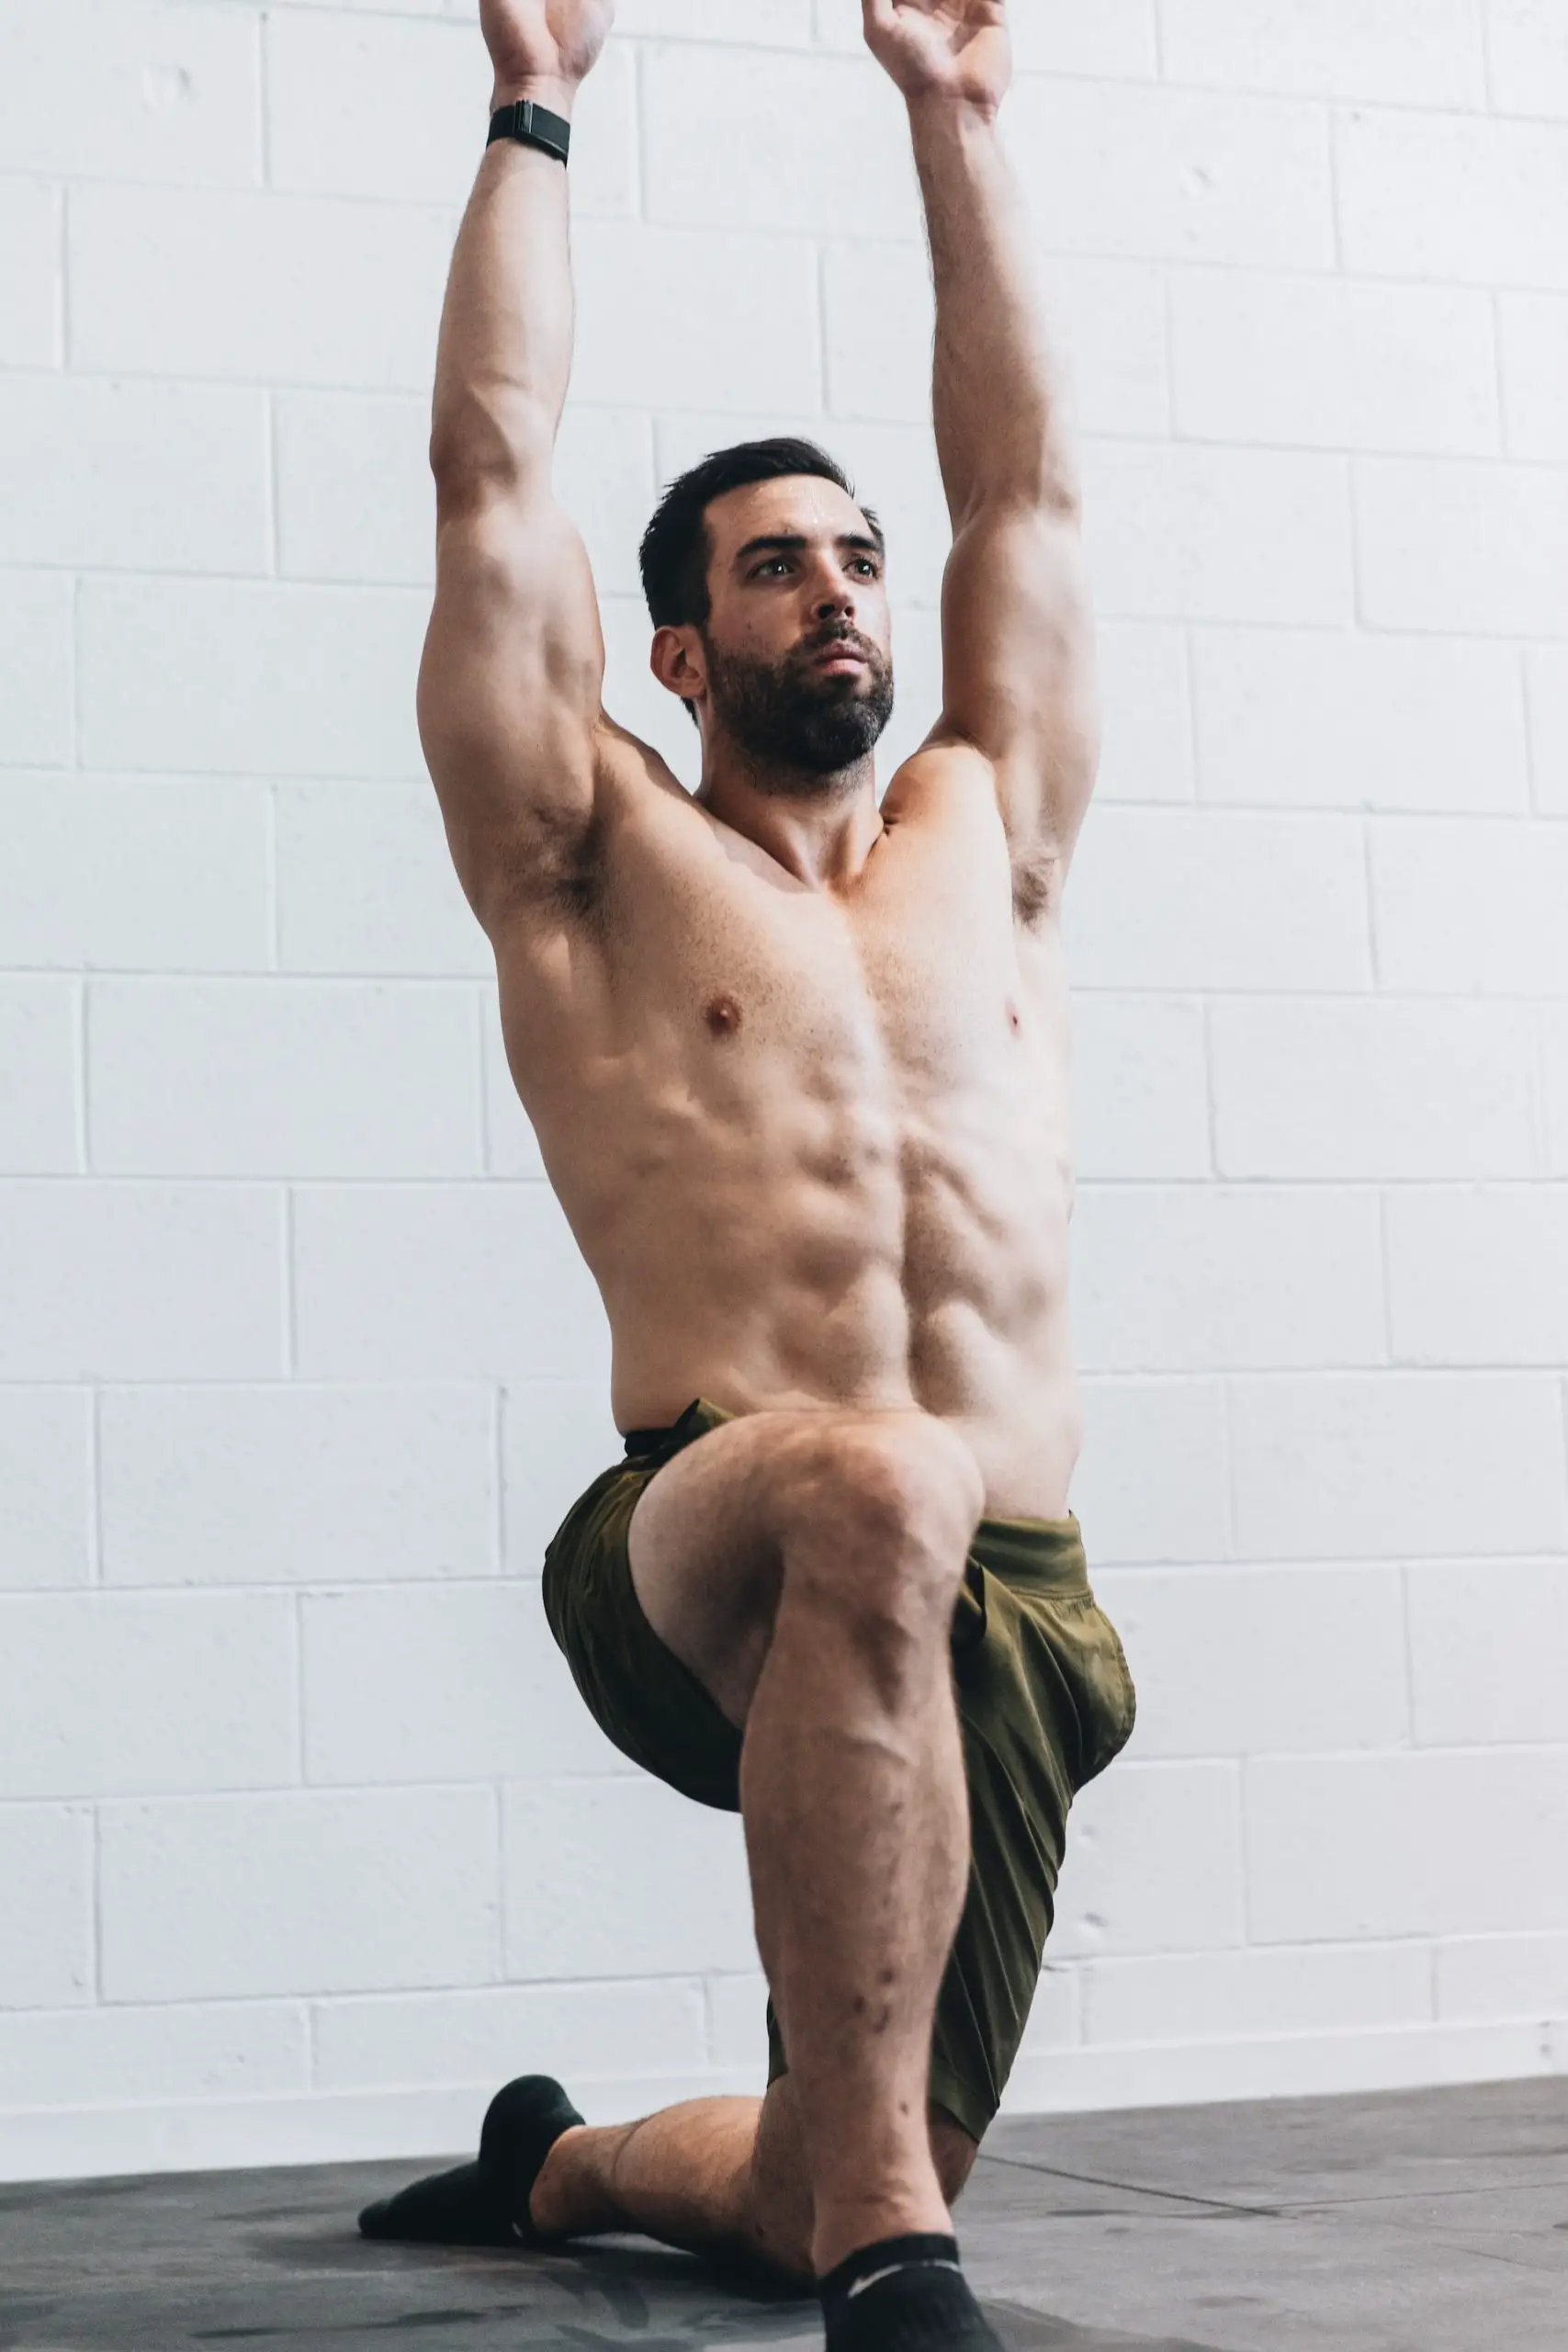 Man flexing and stretching to avoid any injuries